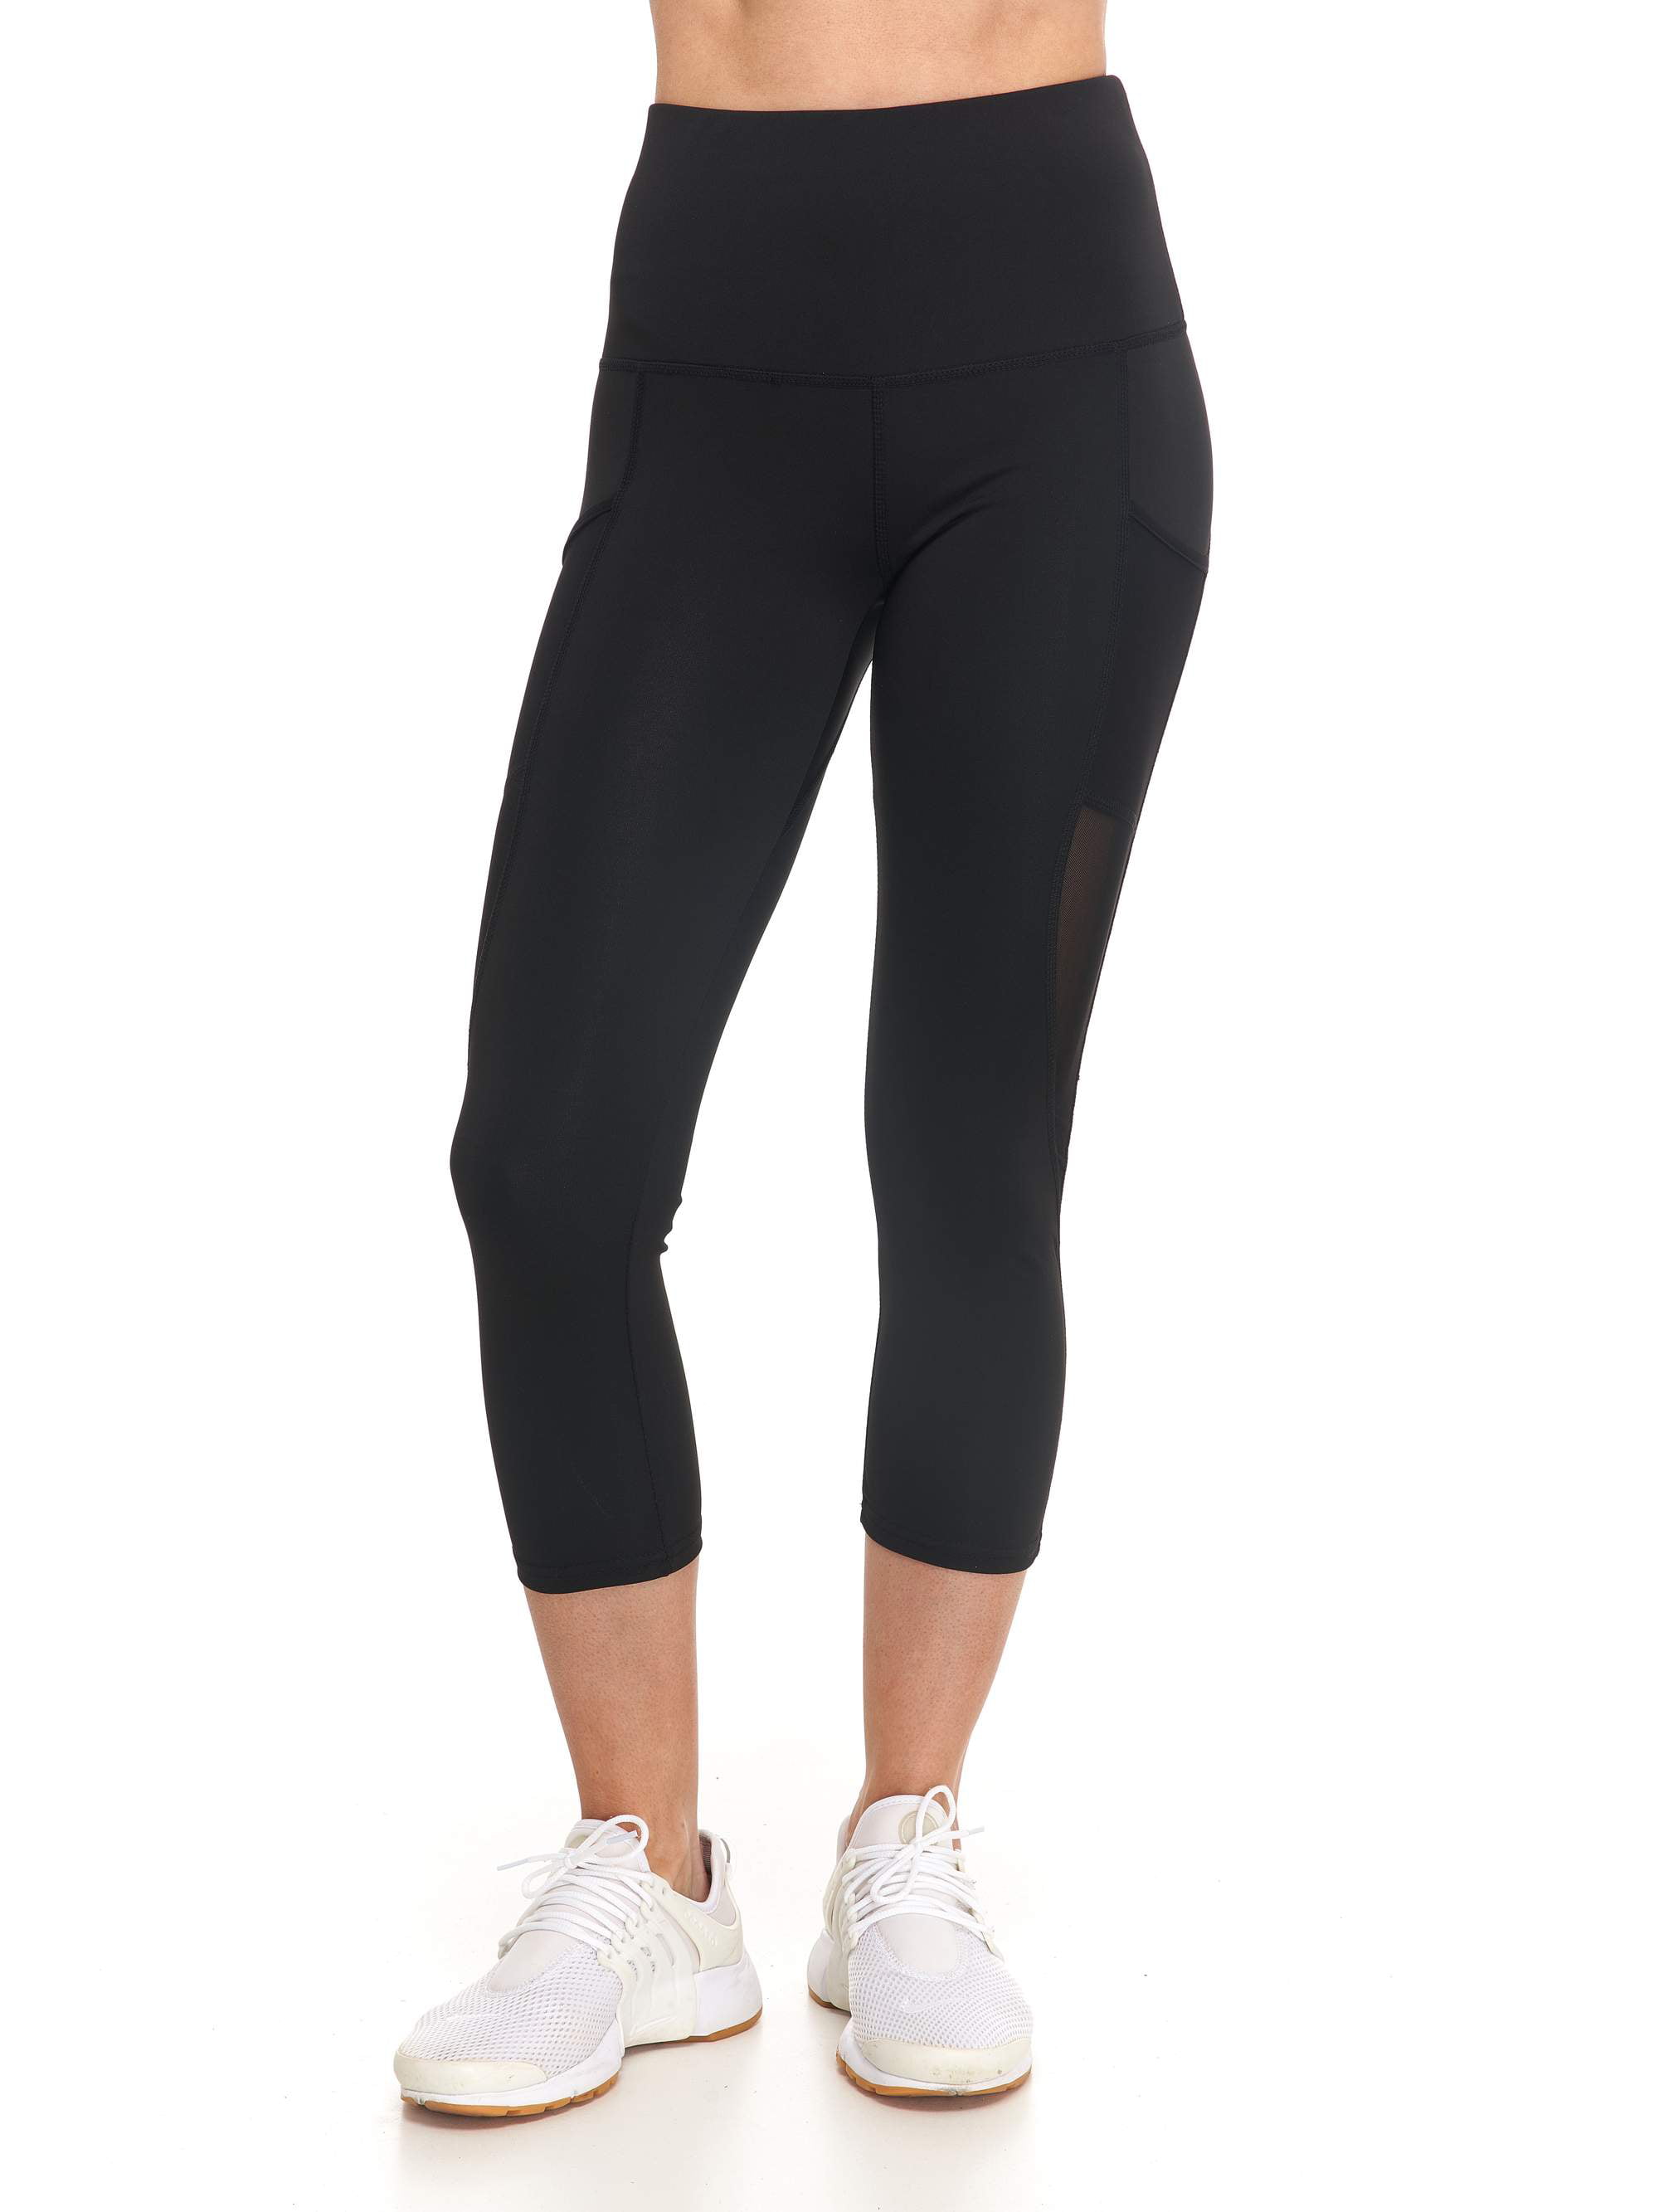 BSP - Women's Active High Rise 7/8 Leggings with Mesh and Pocket ...